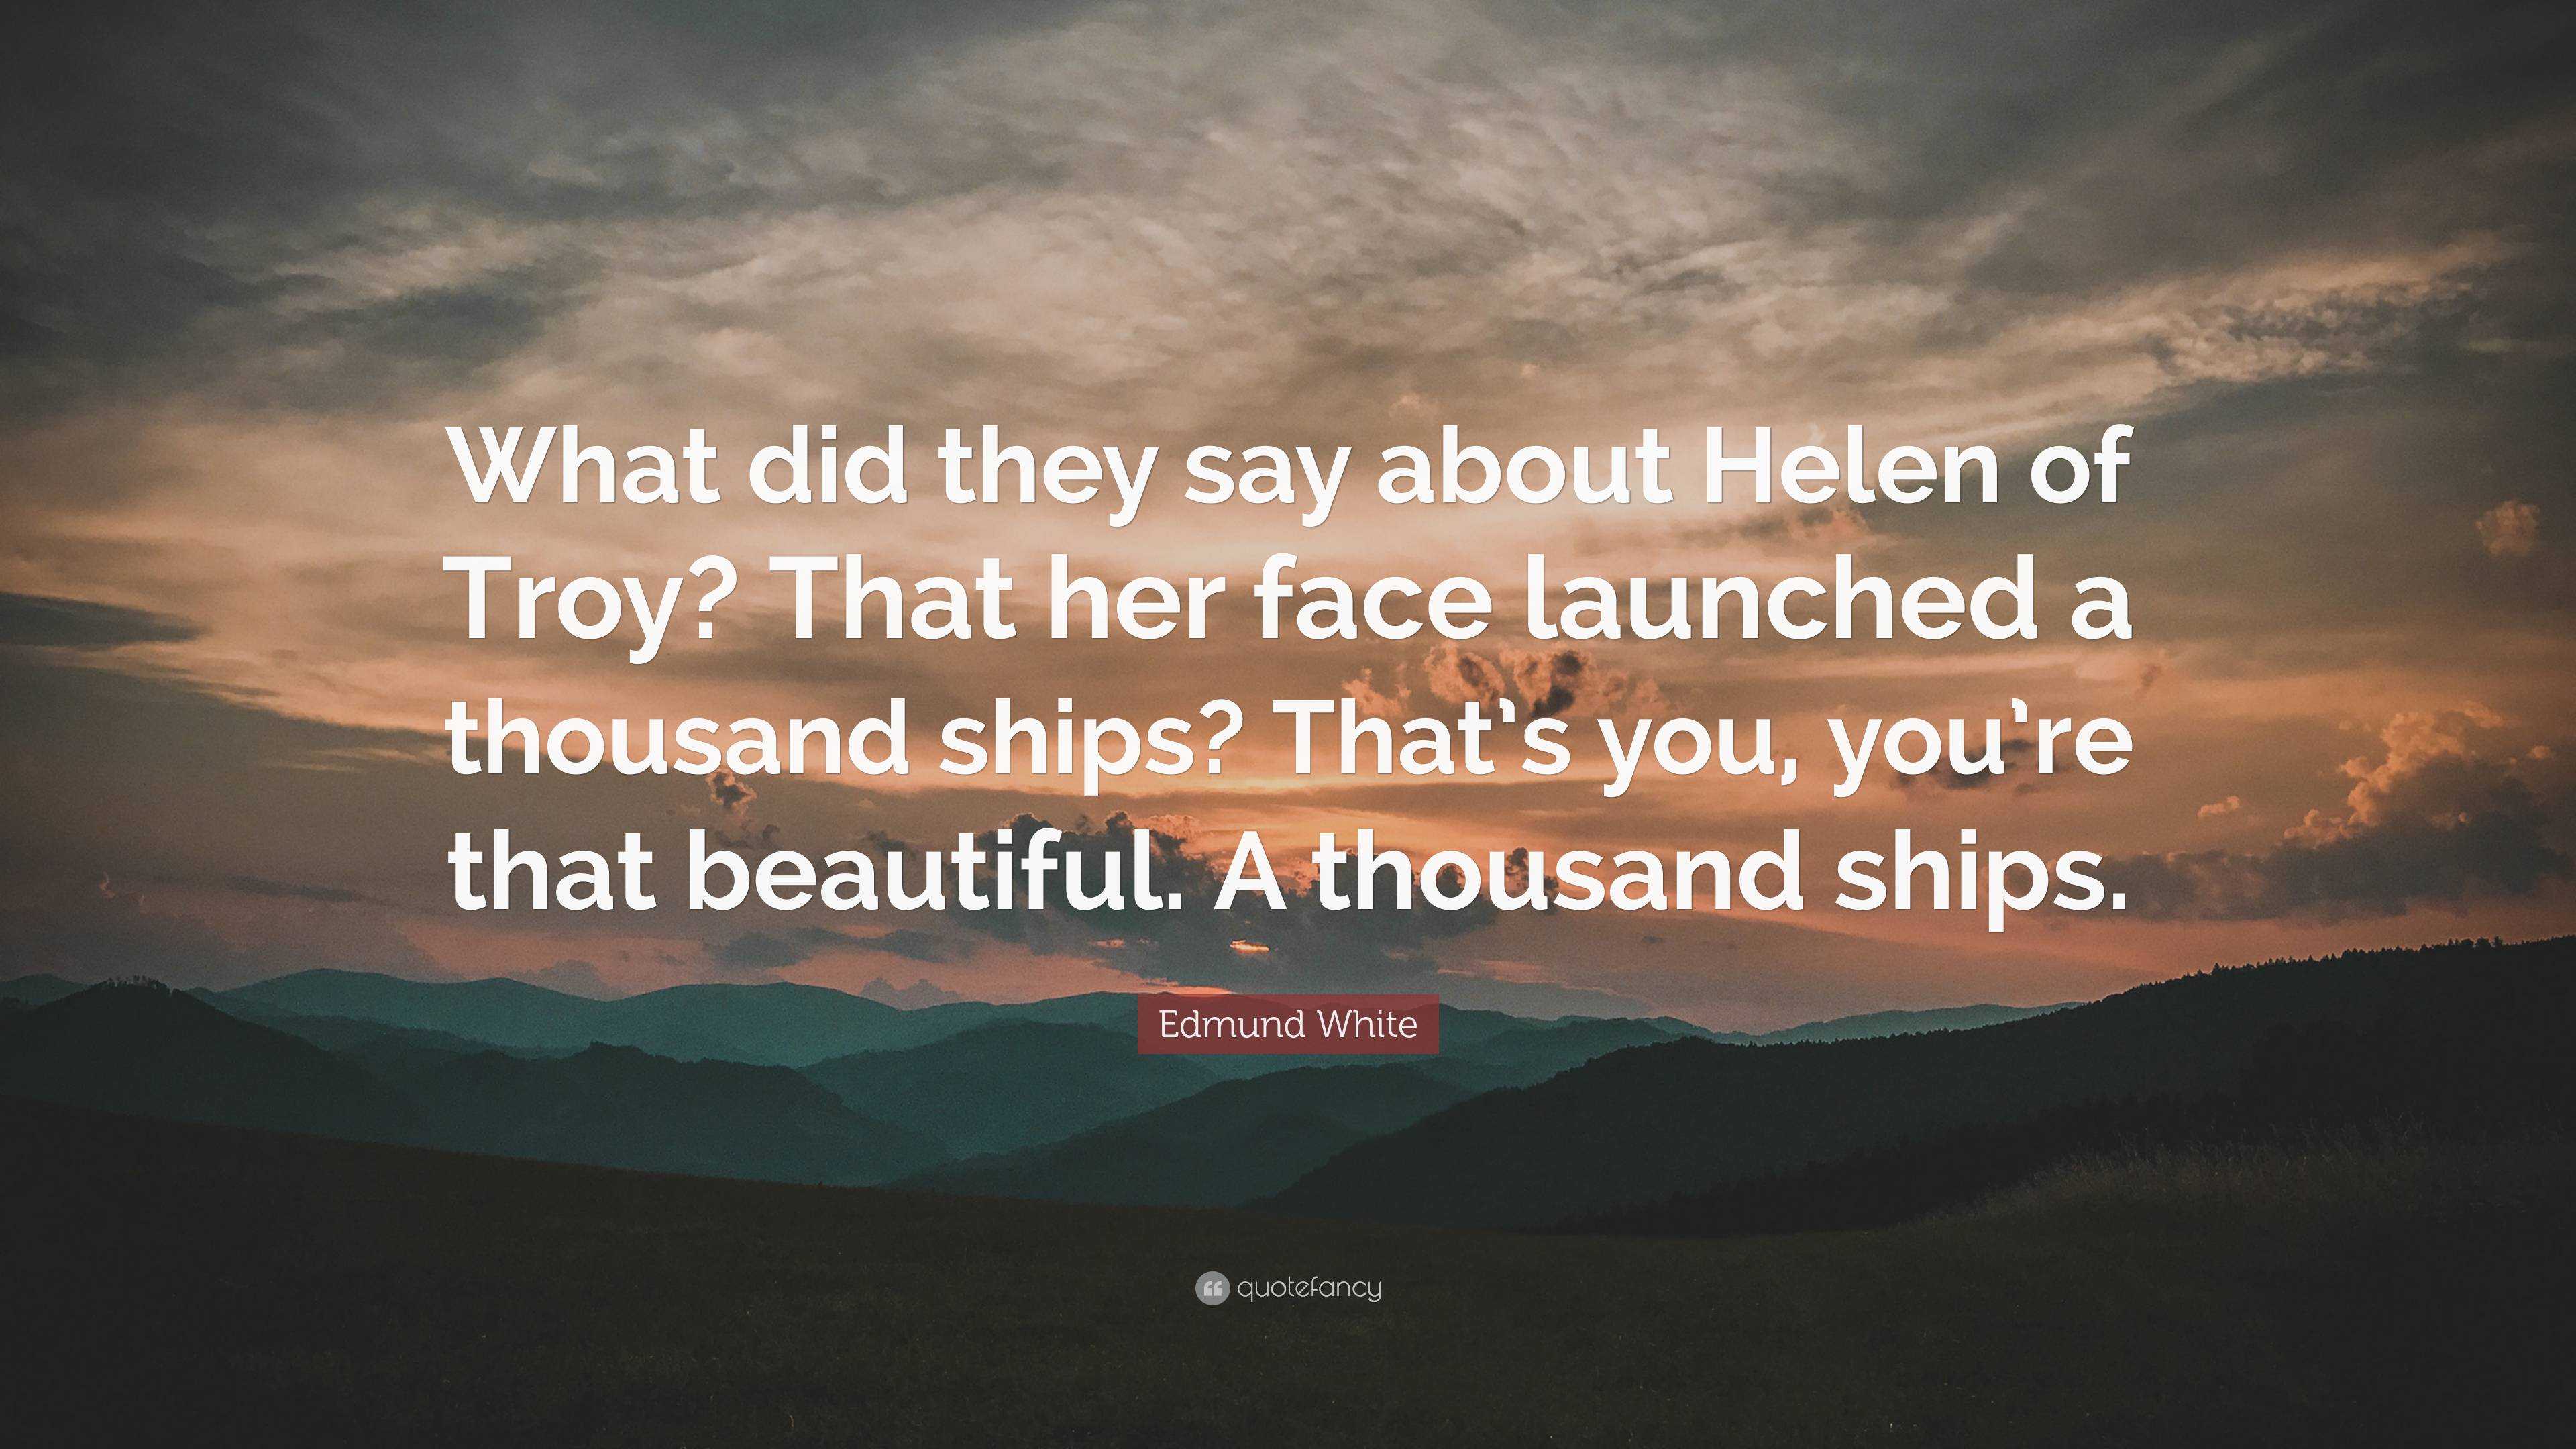 Edmund White Quote “what Did They Say About Helen Of Troy That Her Face Launched A Thousand